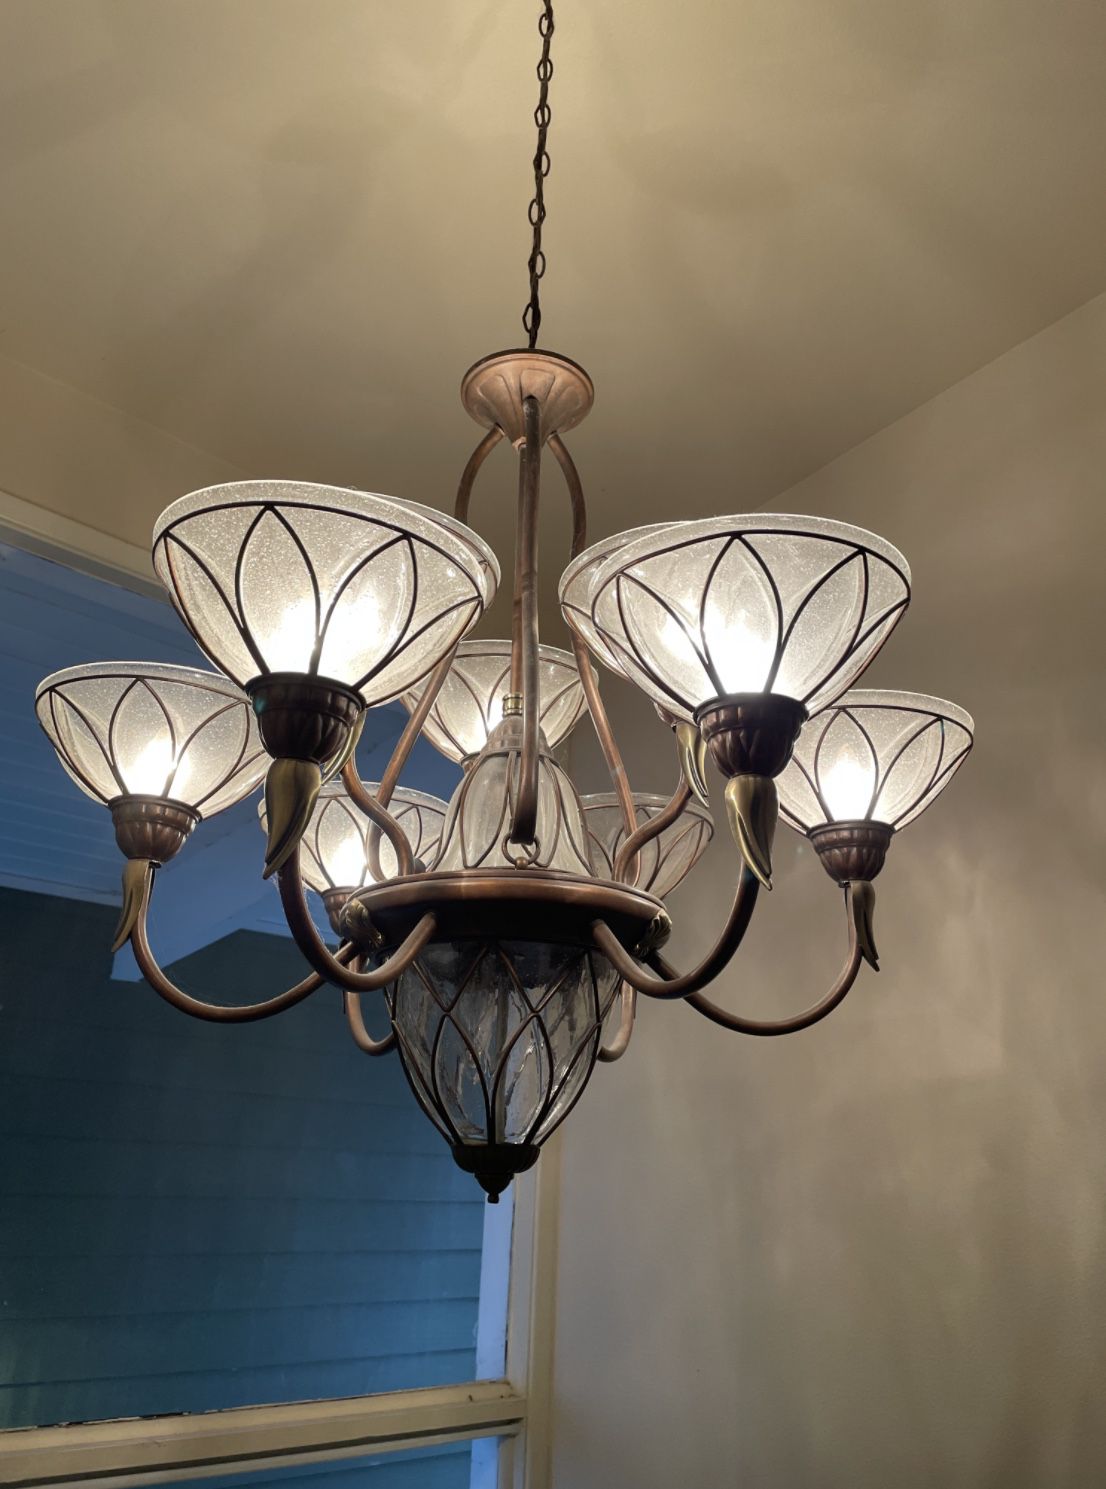  Vintage Chandelier with Extra Glass Globes